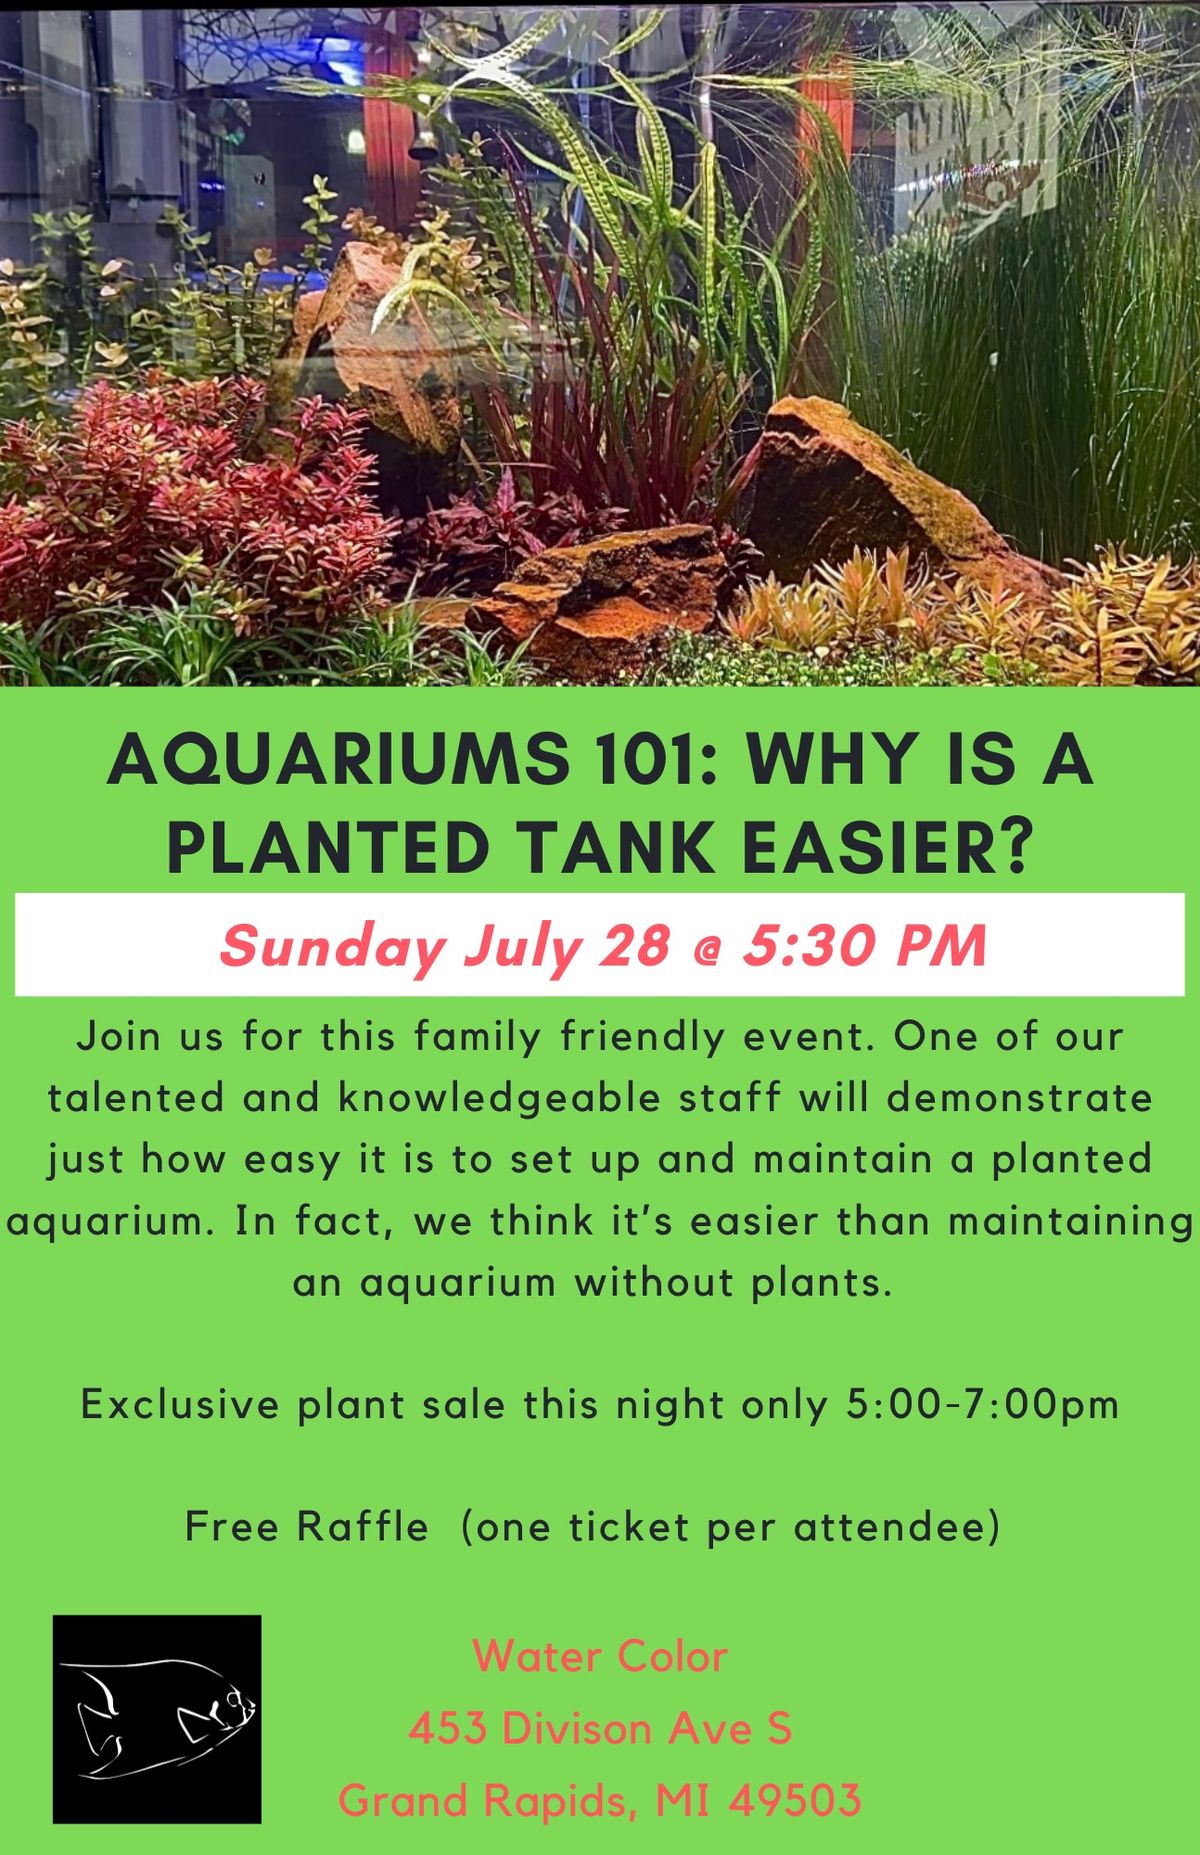 Aquariums 101: why is a planted tank easier? 